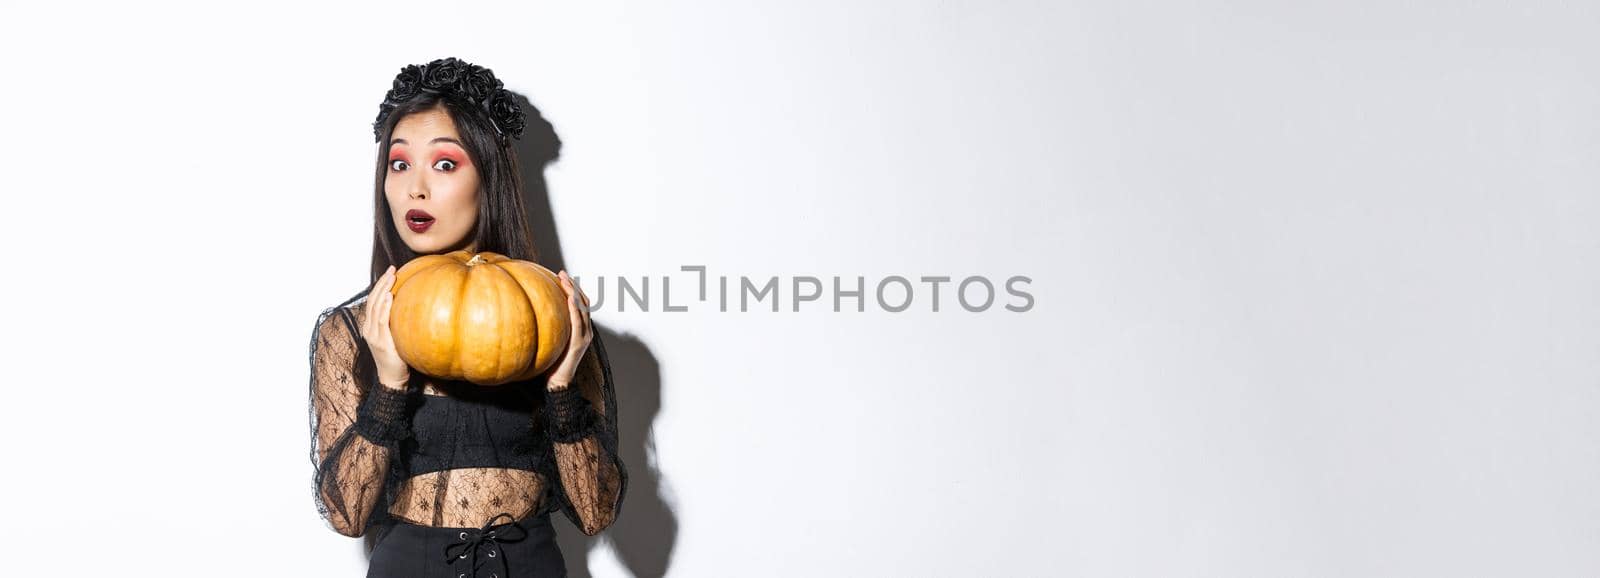 Portrait of woman lifting heavy pumpkin, getting ready for halloween, wearing witch costume, standing over white background by Benzoix